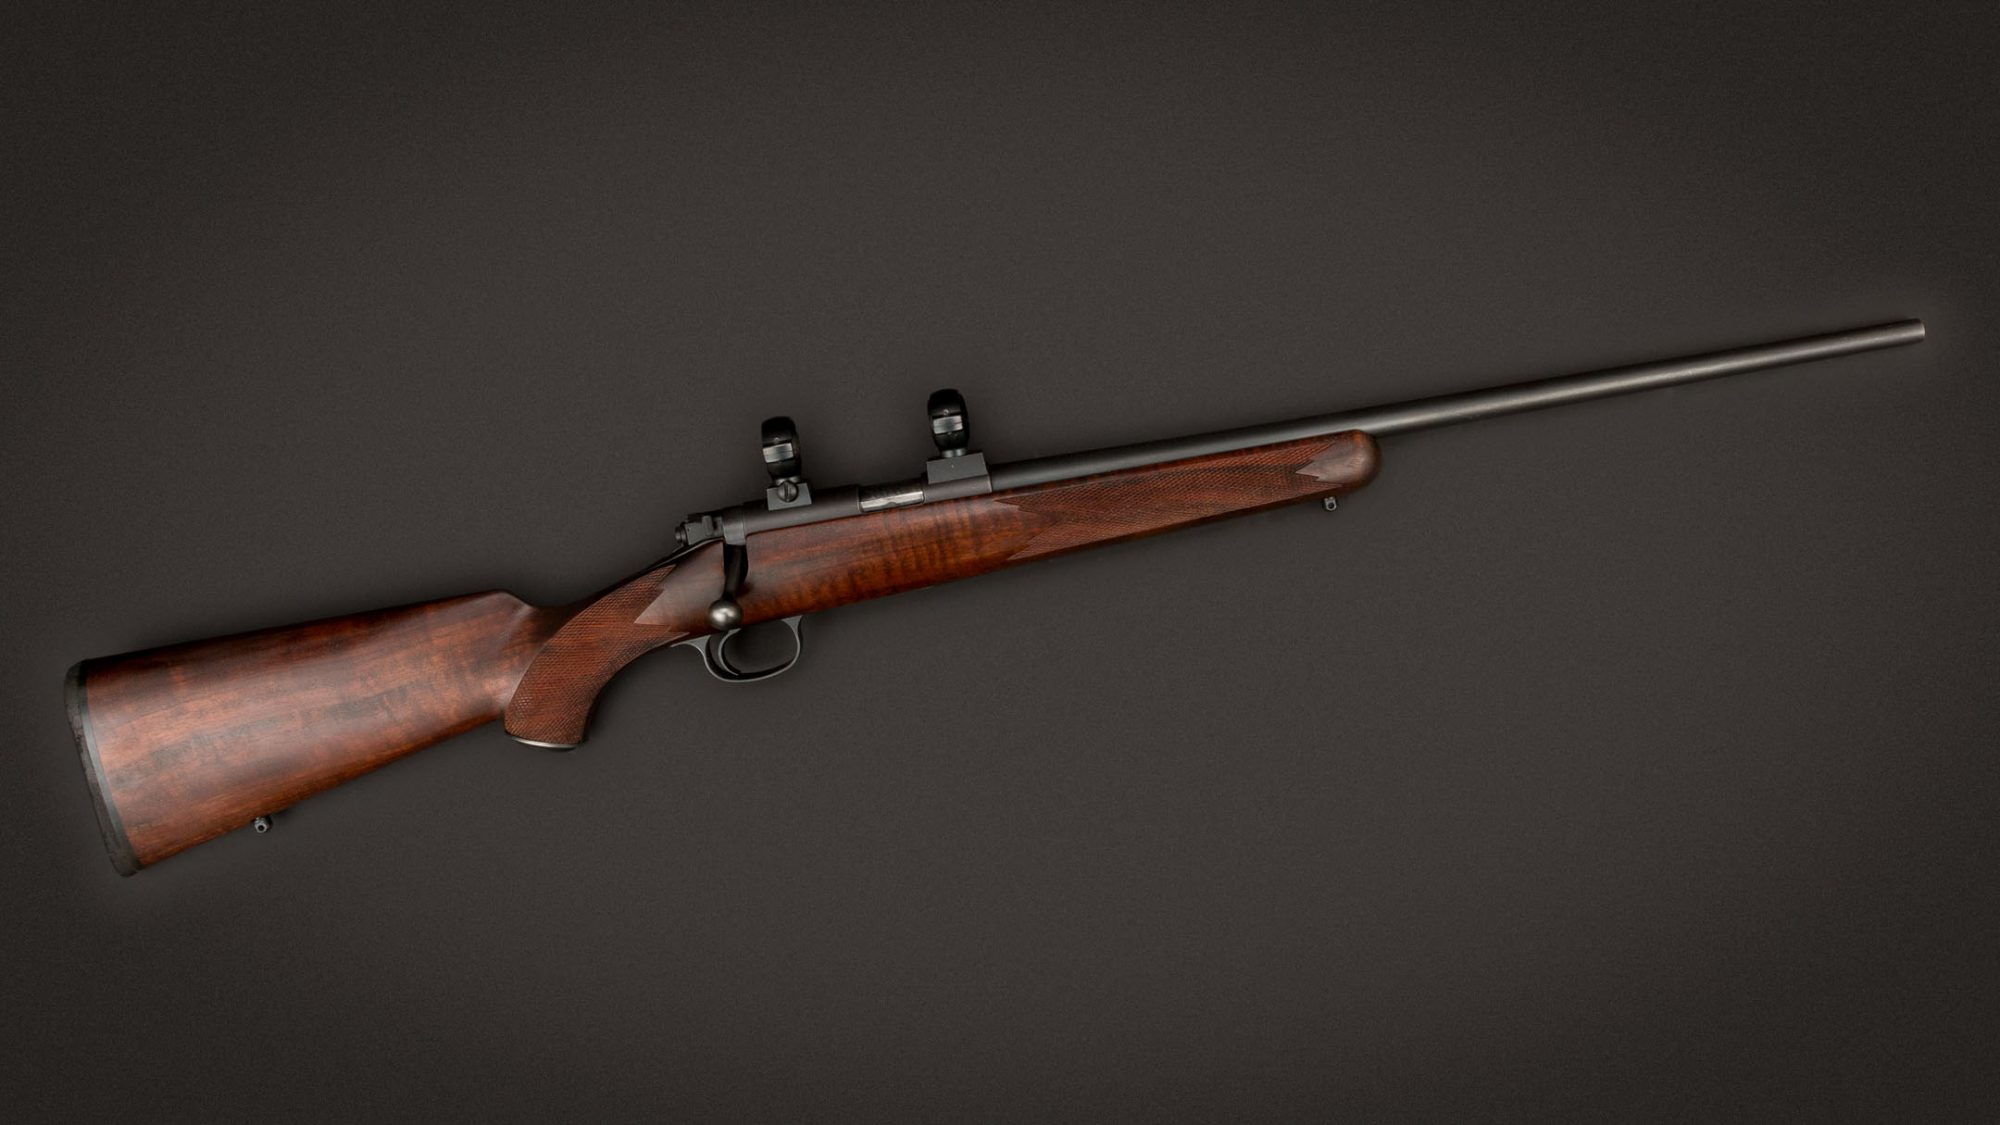 Kimber Classic bolt-action rifle chambered in 22 Long Rifle, for sale by Turnbull Restoration of Bloomfield, NY